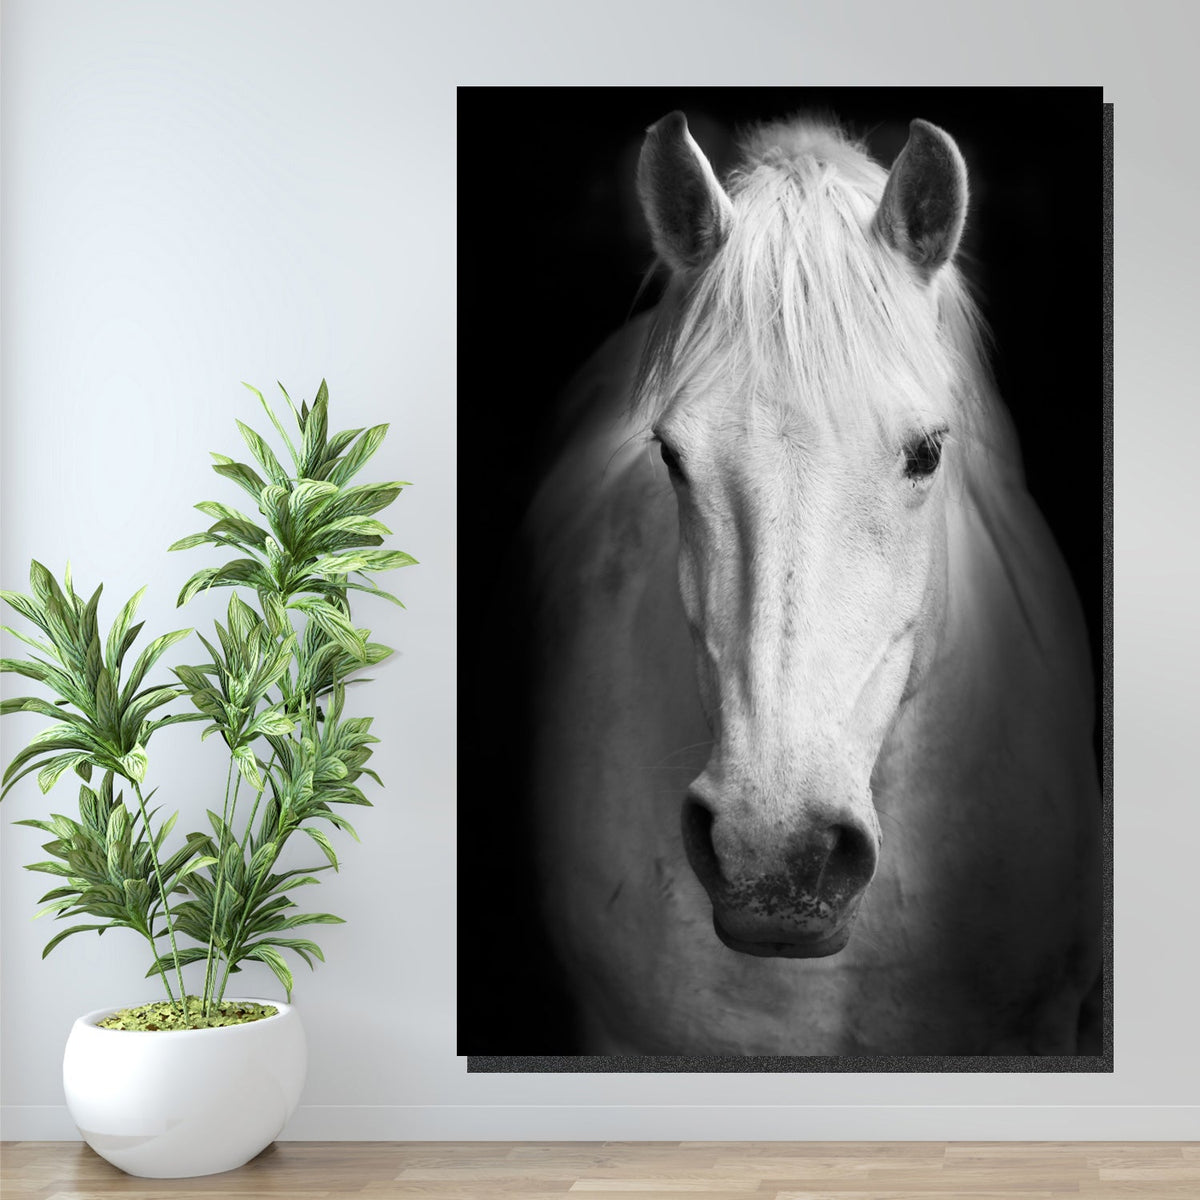 https://cdn.shopify.com/s/files/1/0387/9986/8044/products/AWhiteHorseCanvasArtprintStretched-4.jpg